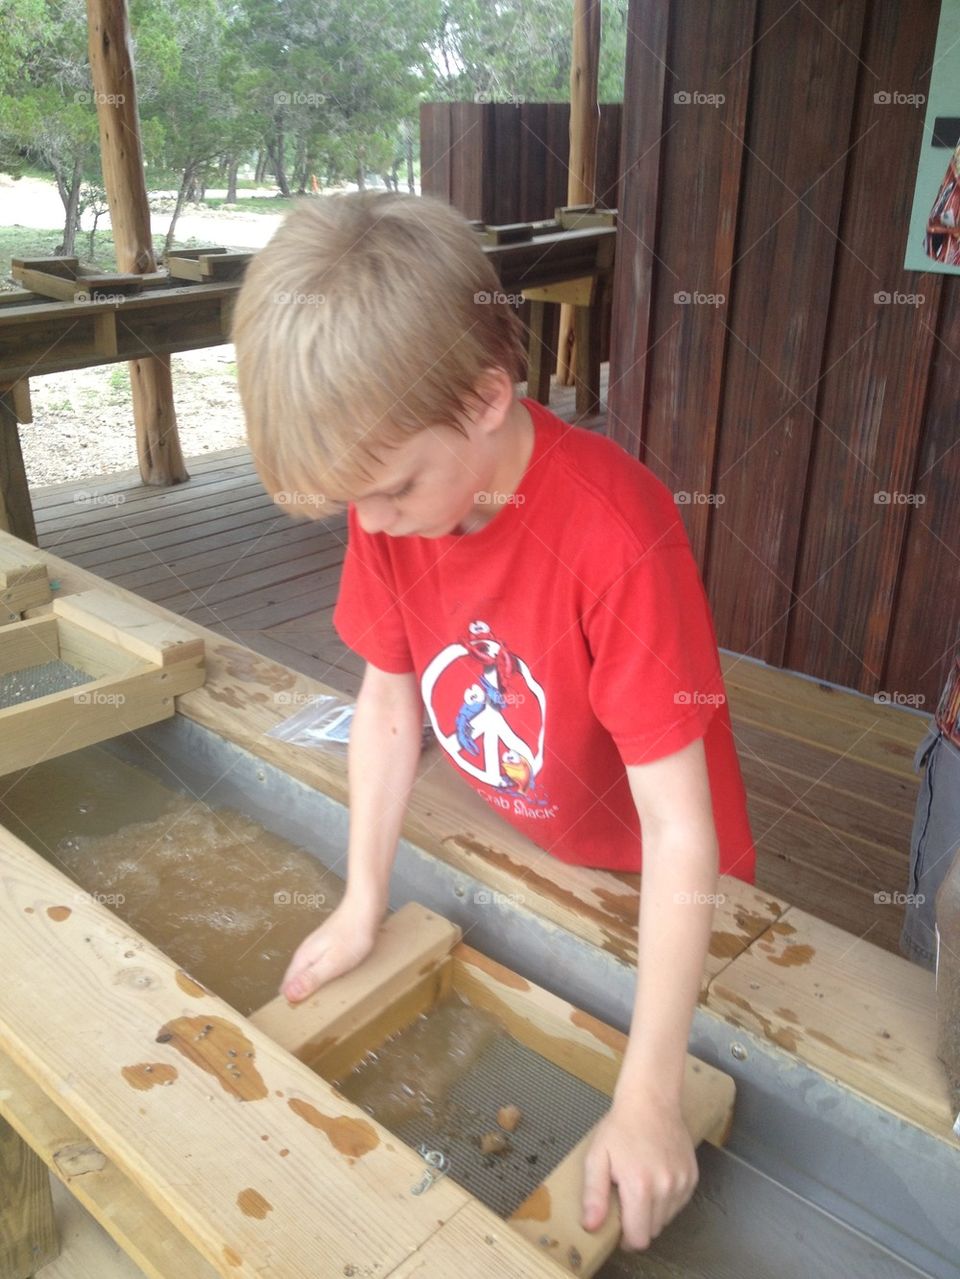 Boy panning for gold